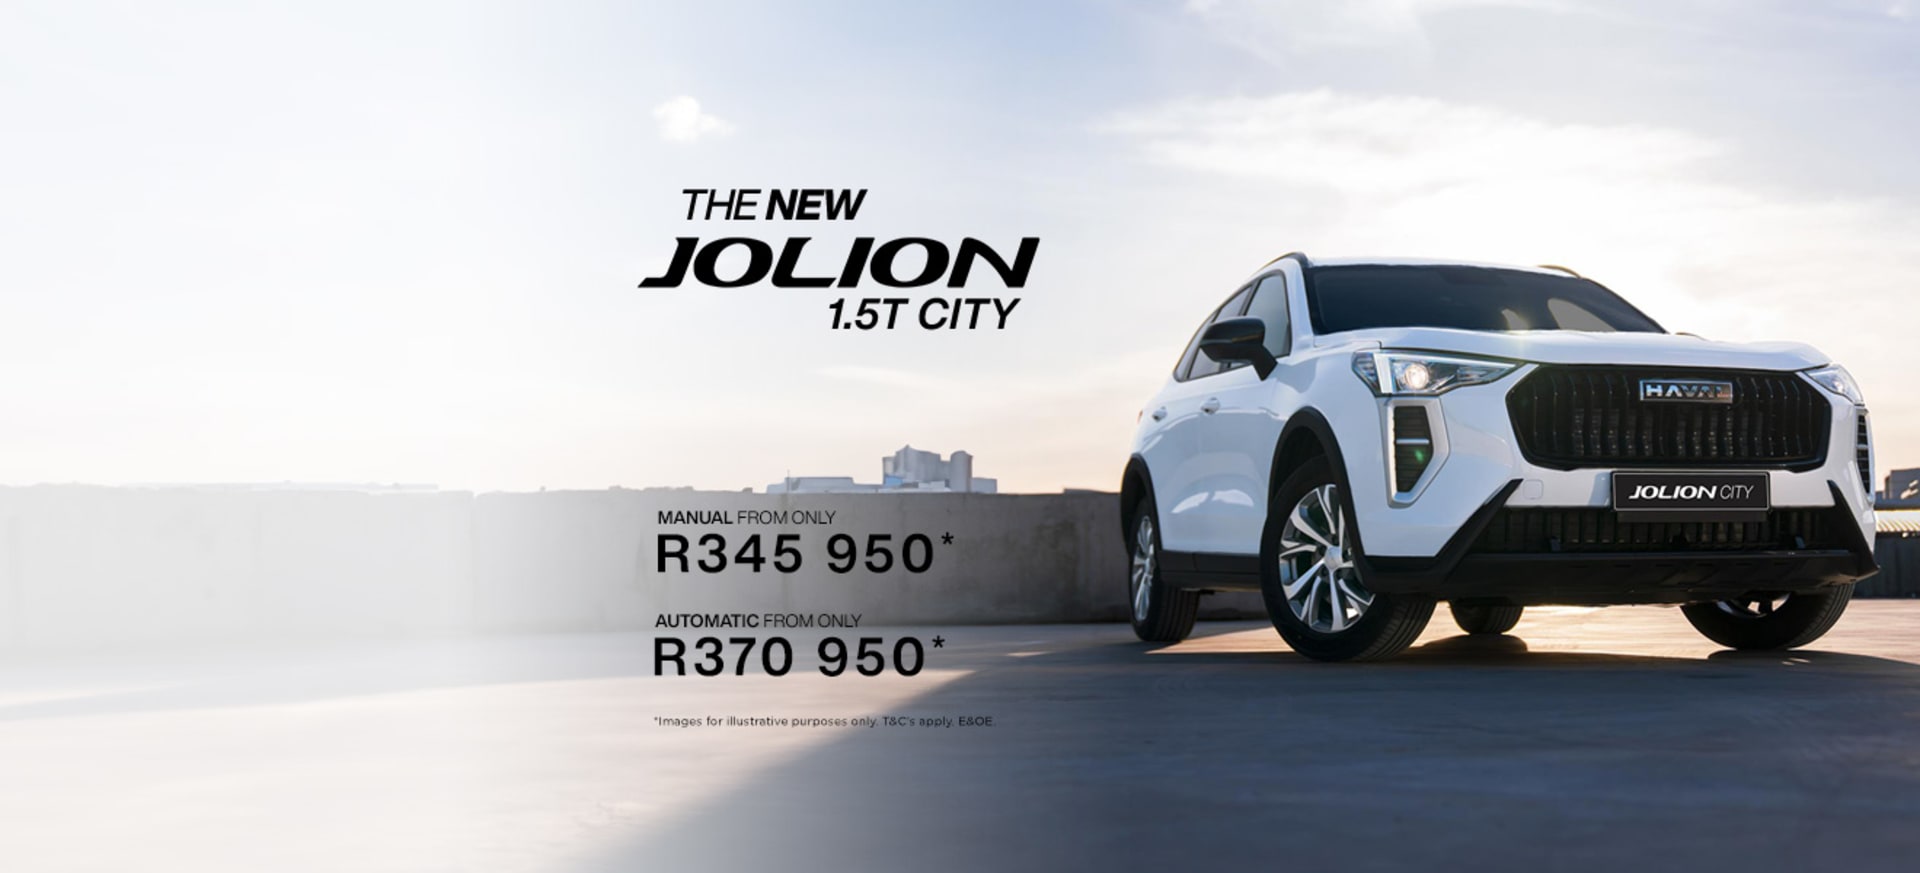 New HAVAL Jolion City from R345 950*